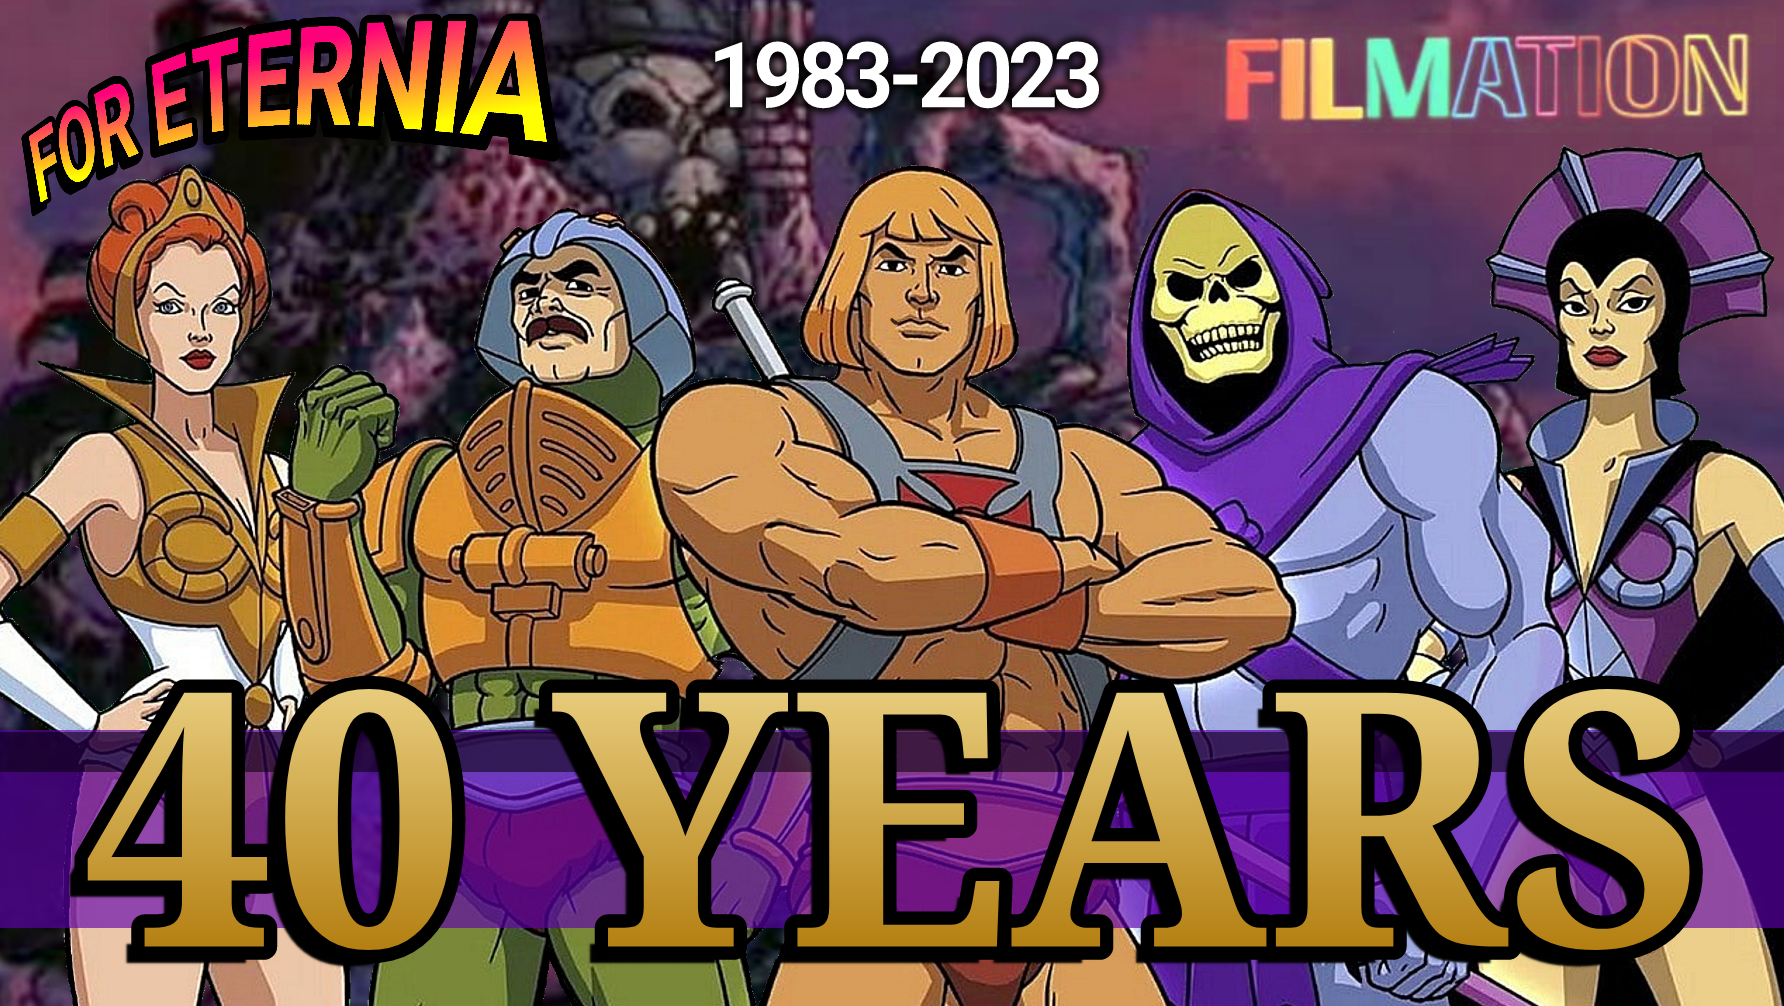 HAPPY 40TH! Celebrating the Anniversary of Filmation’s ”He-Man and the Masters of the Universe”